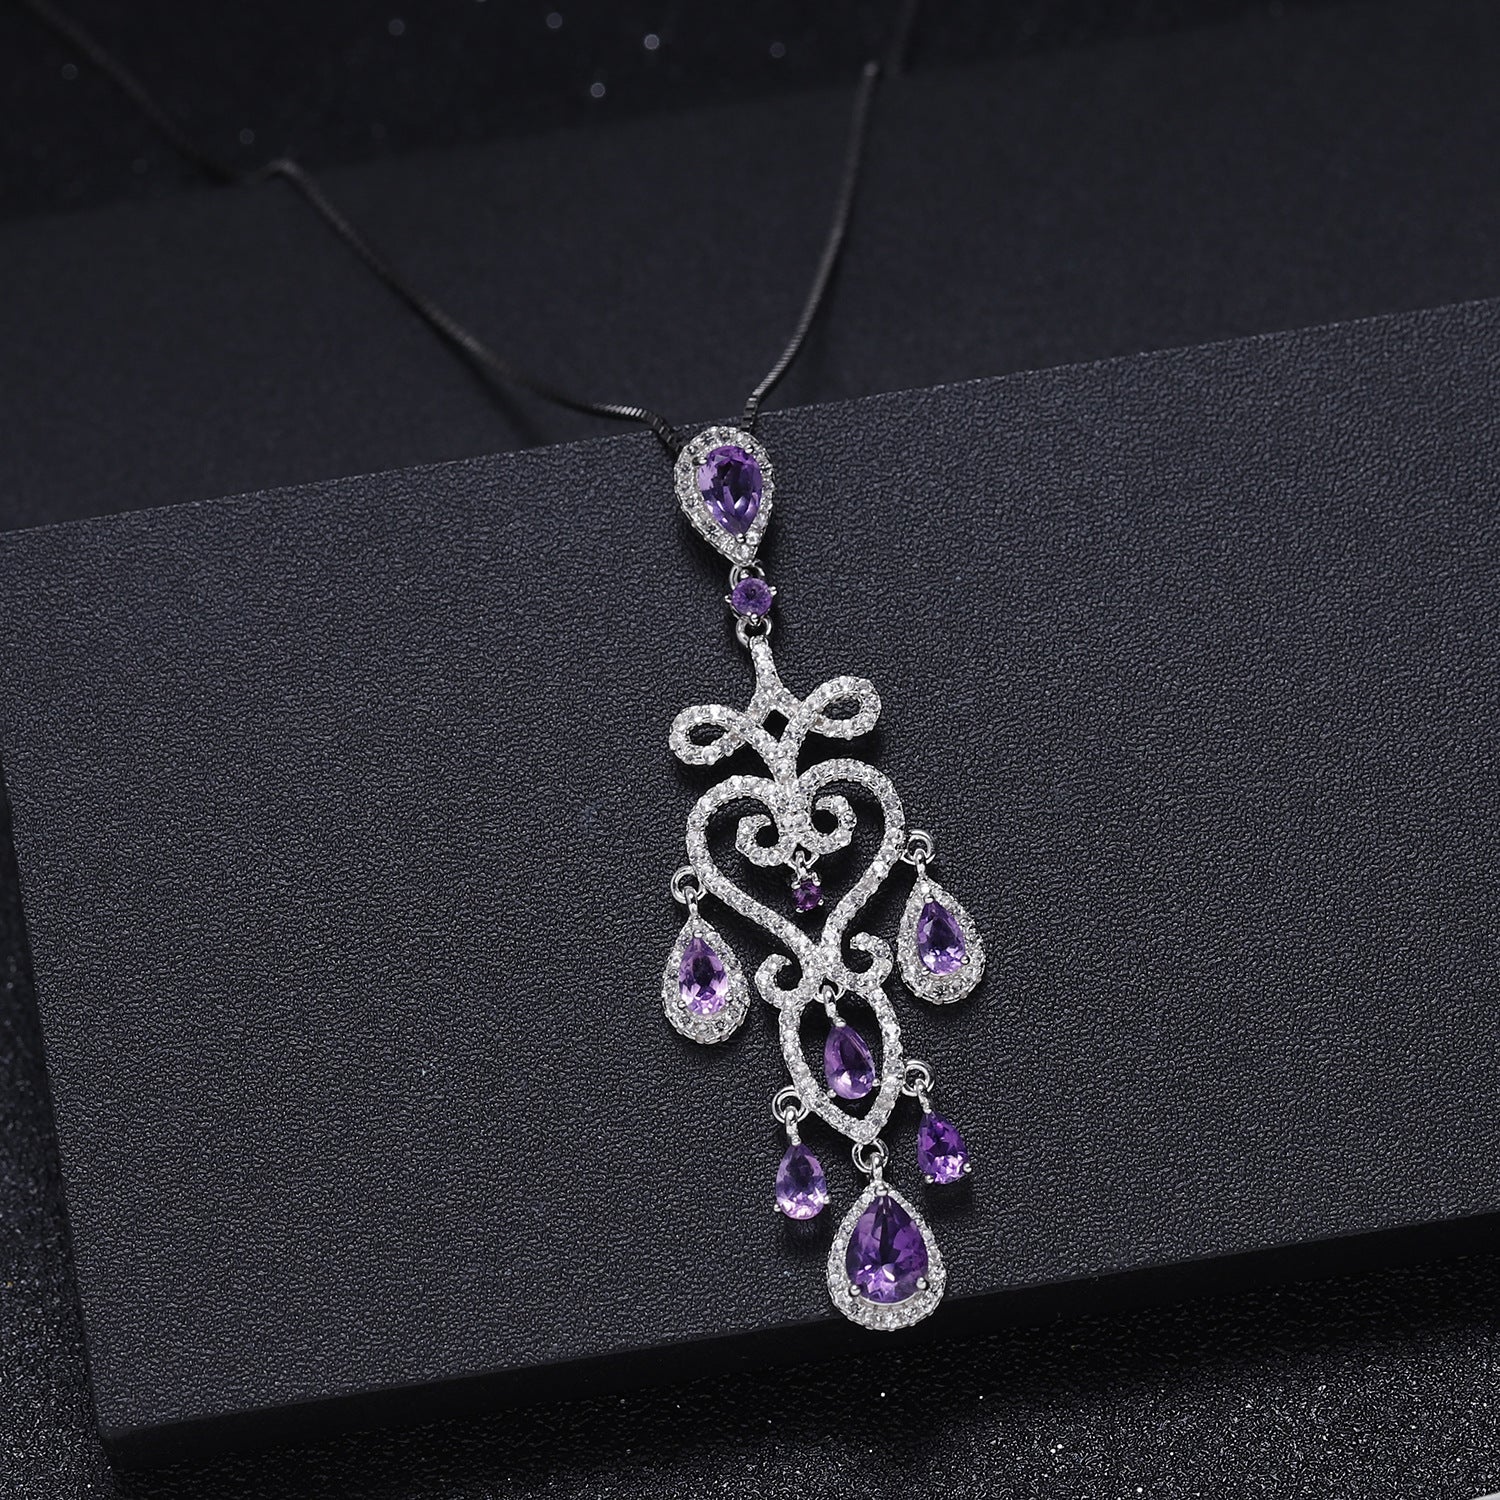 French Romantic Luxury Natural Amethyst Premium Pendant Necklace for Women